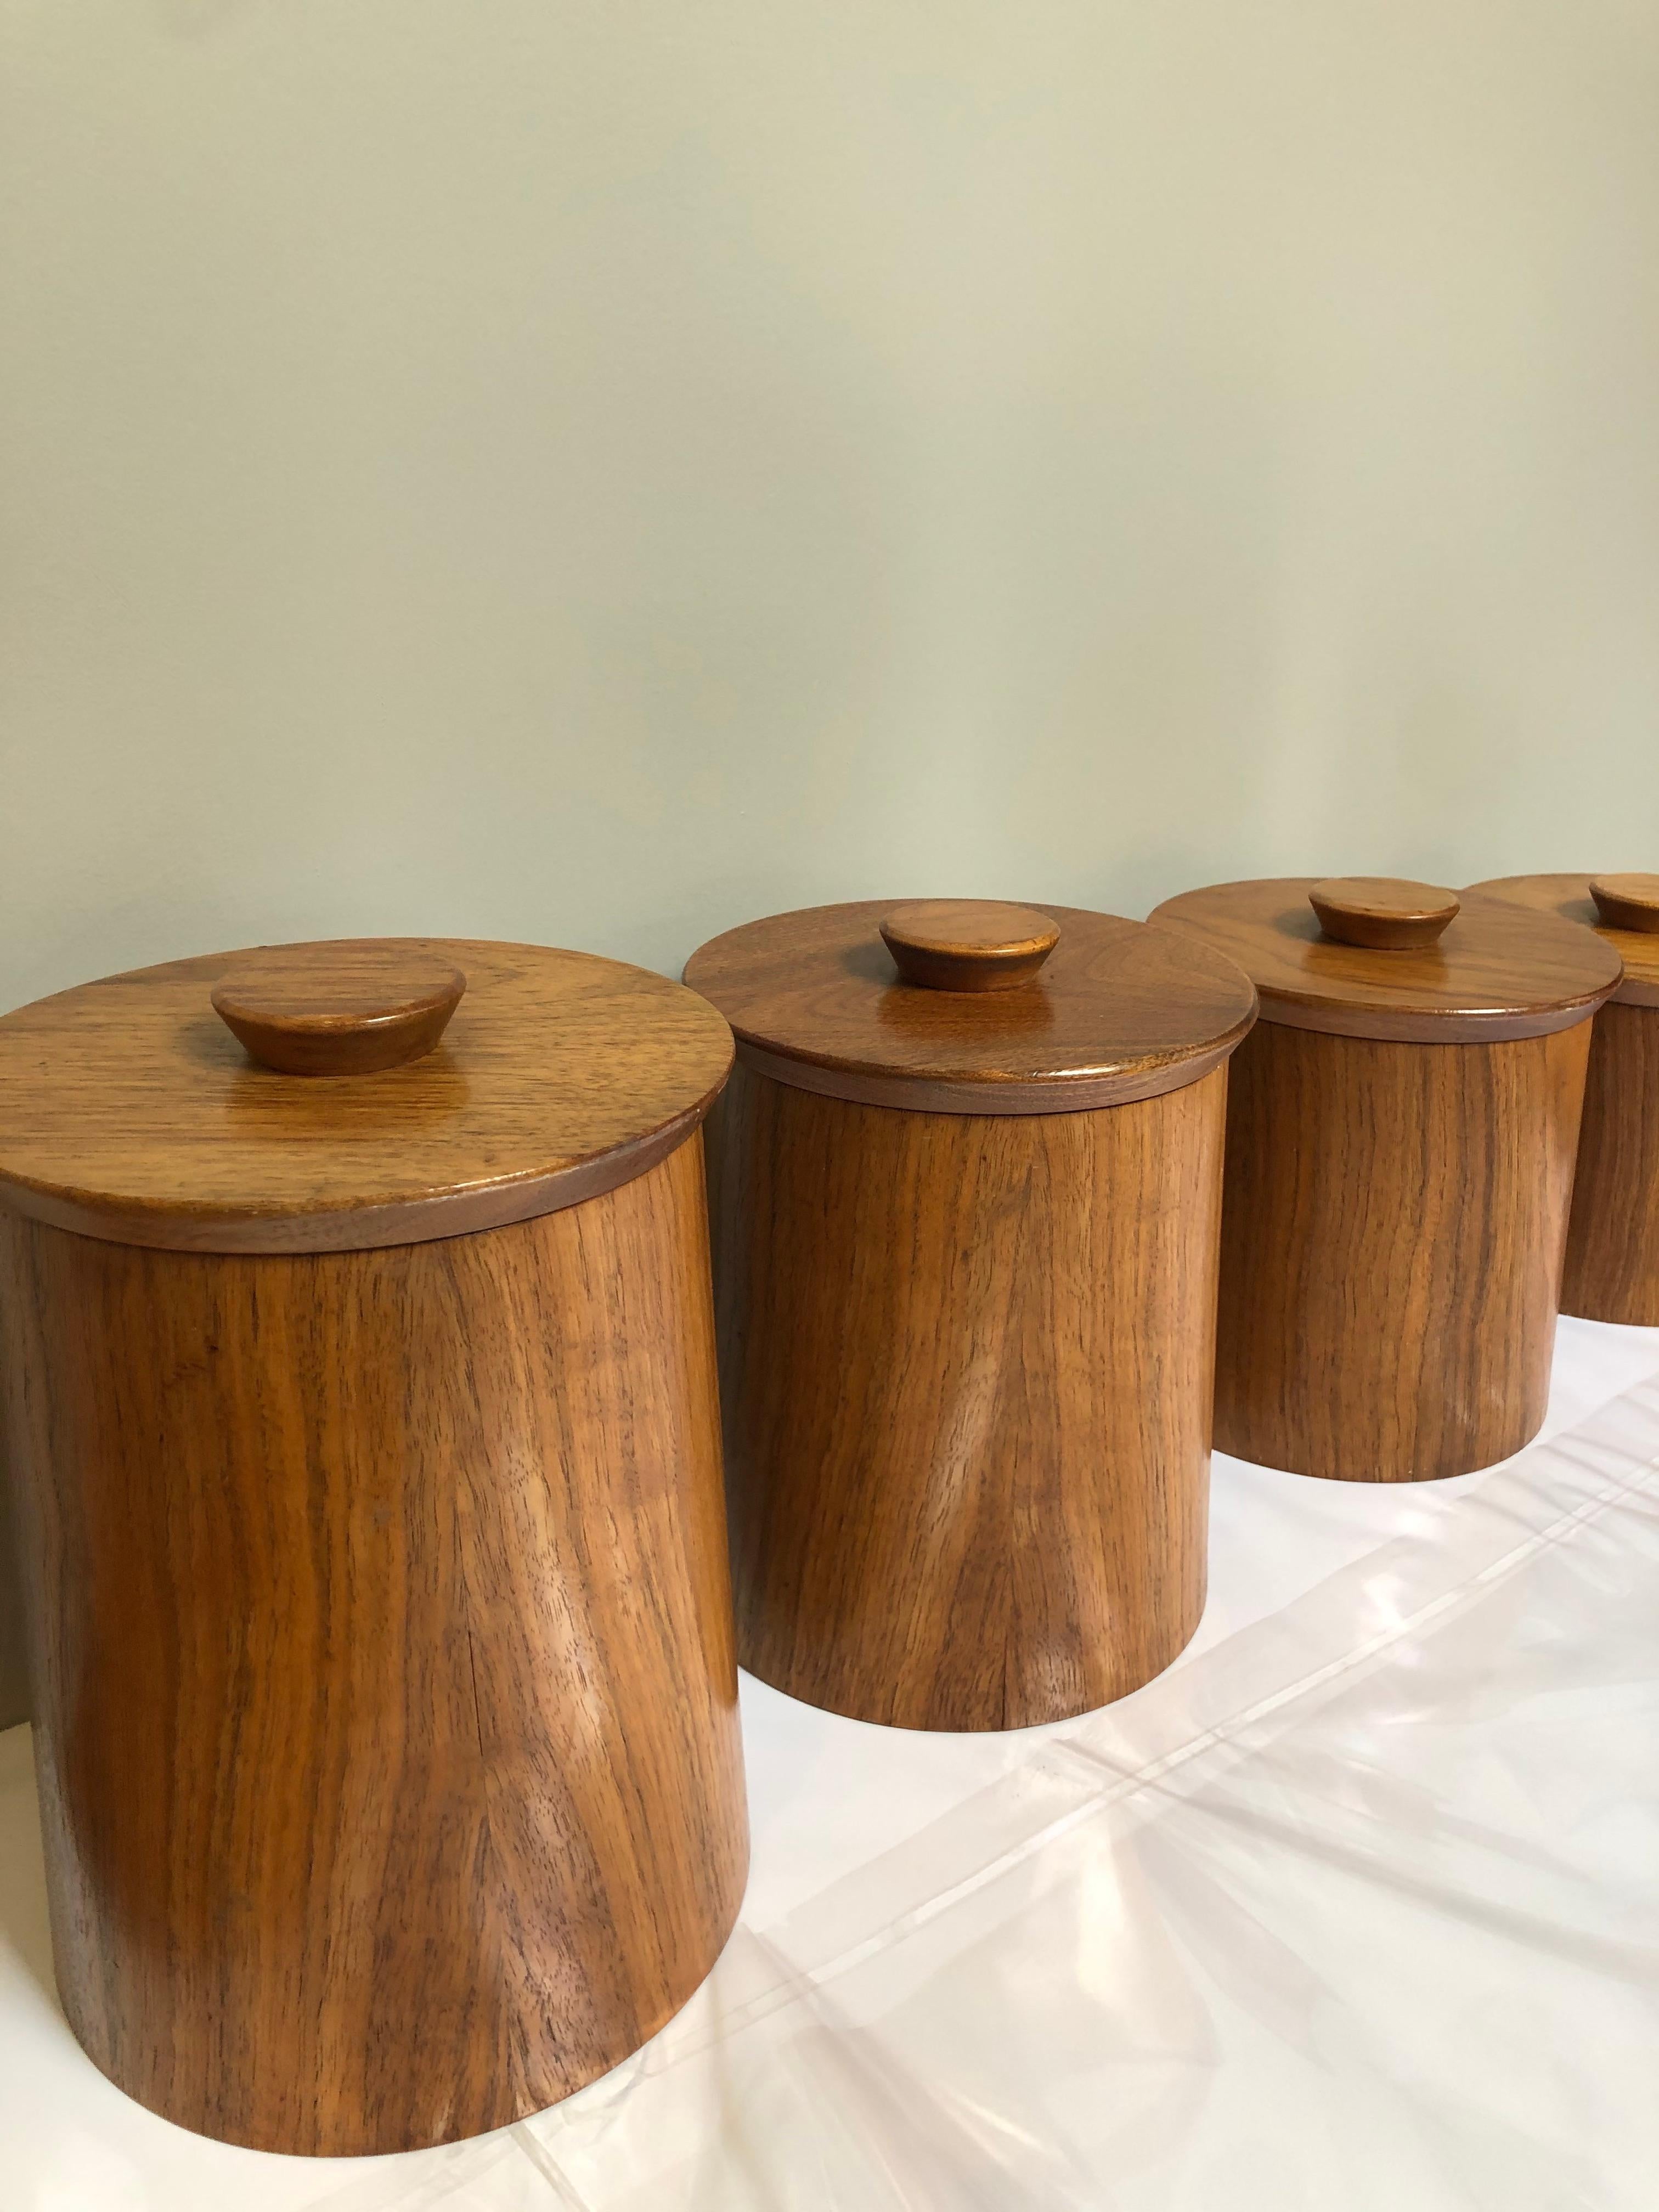 This set of 4 canisters merge functionality with modern aesthetics. These canisters would serve as well on a desk as on shelves in a library. They have lids of graduating sizes in teak. (Size noted is that of largest canister).